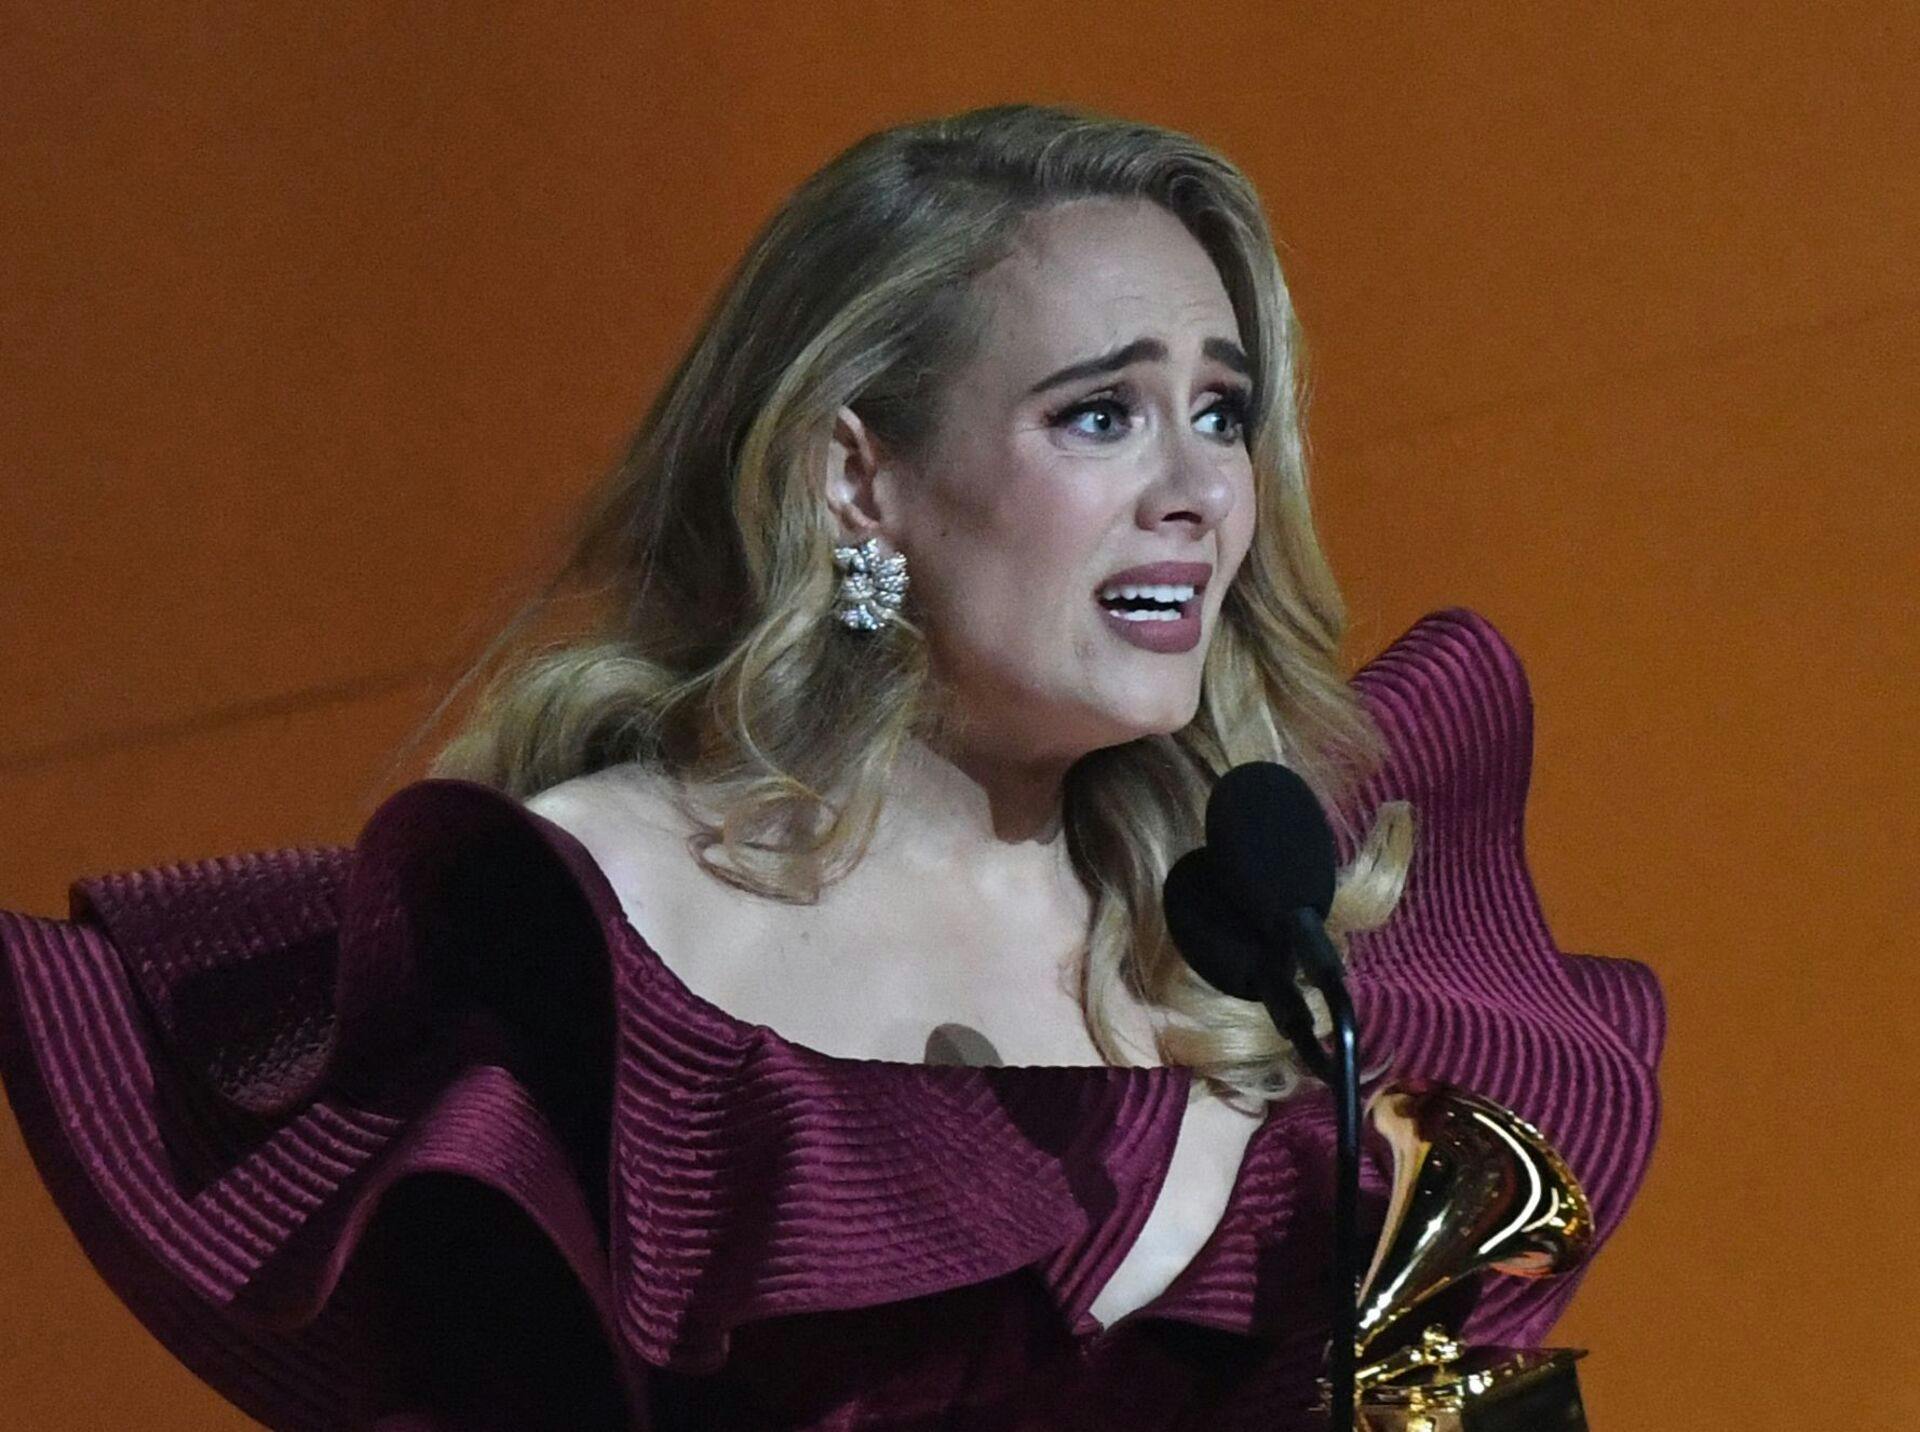 English singer-songwriter Adele accepts the award for Best Pop Solo Performance for "Easy on Me" during the 65th Annual Grammy Awards at the Crypto.com Arena in Los Angeles on February 5, 2023. (Photo by VALERIE MACON / AFP)